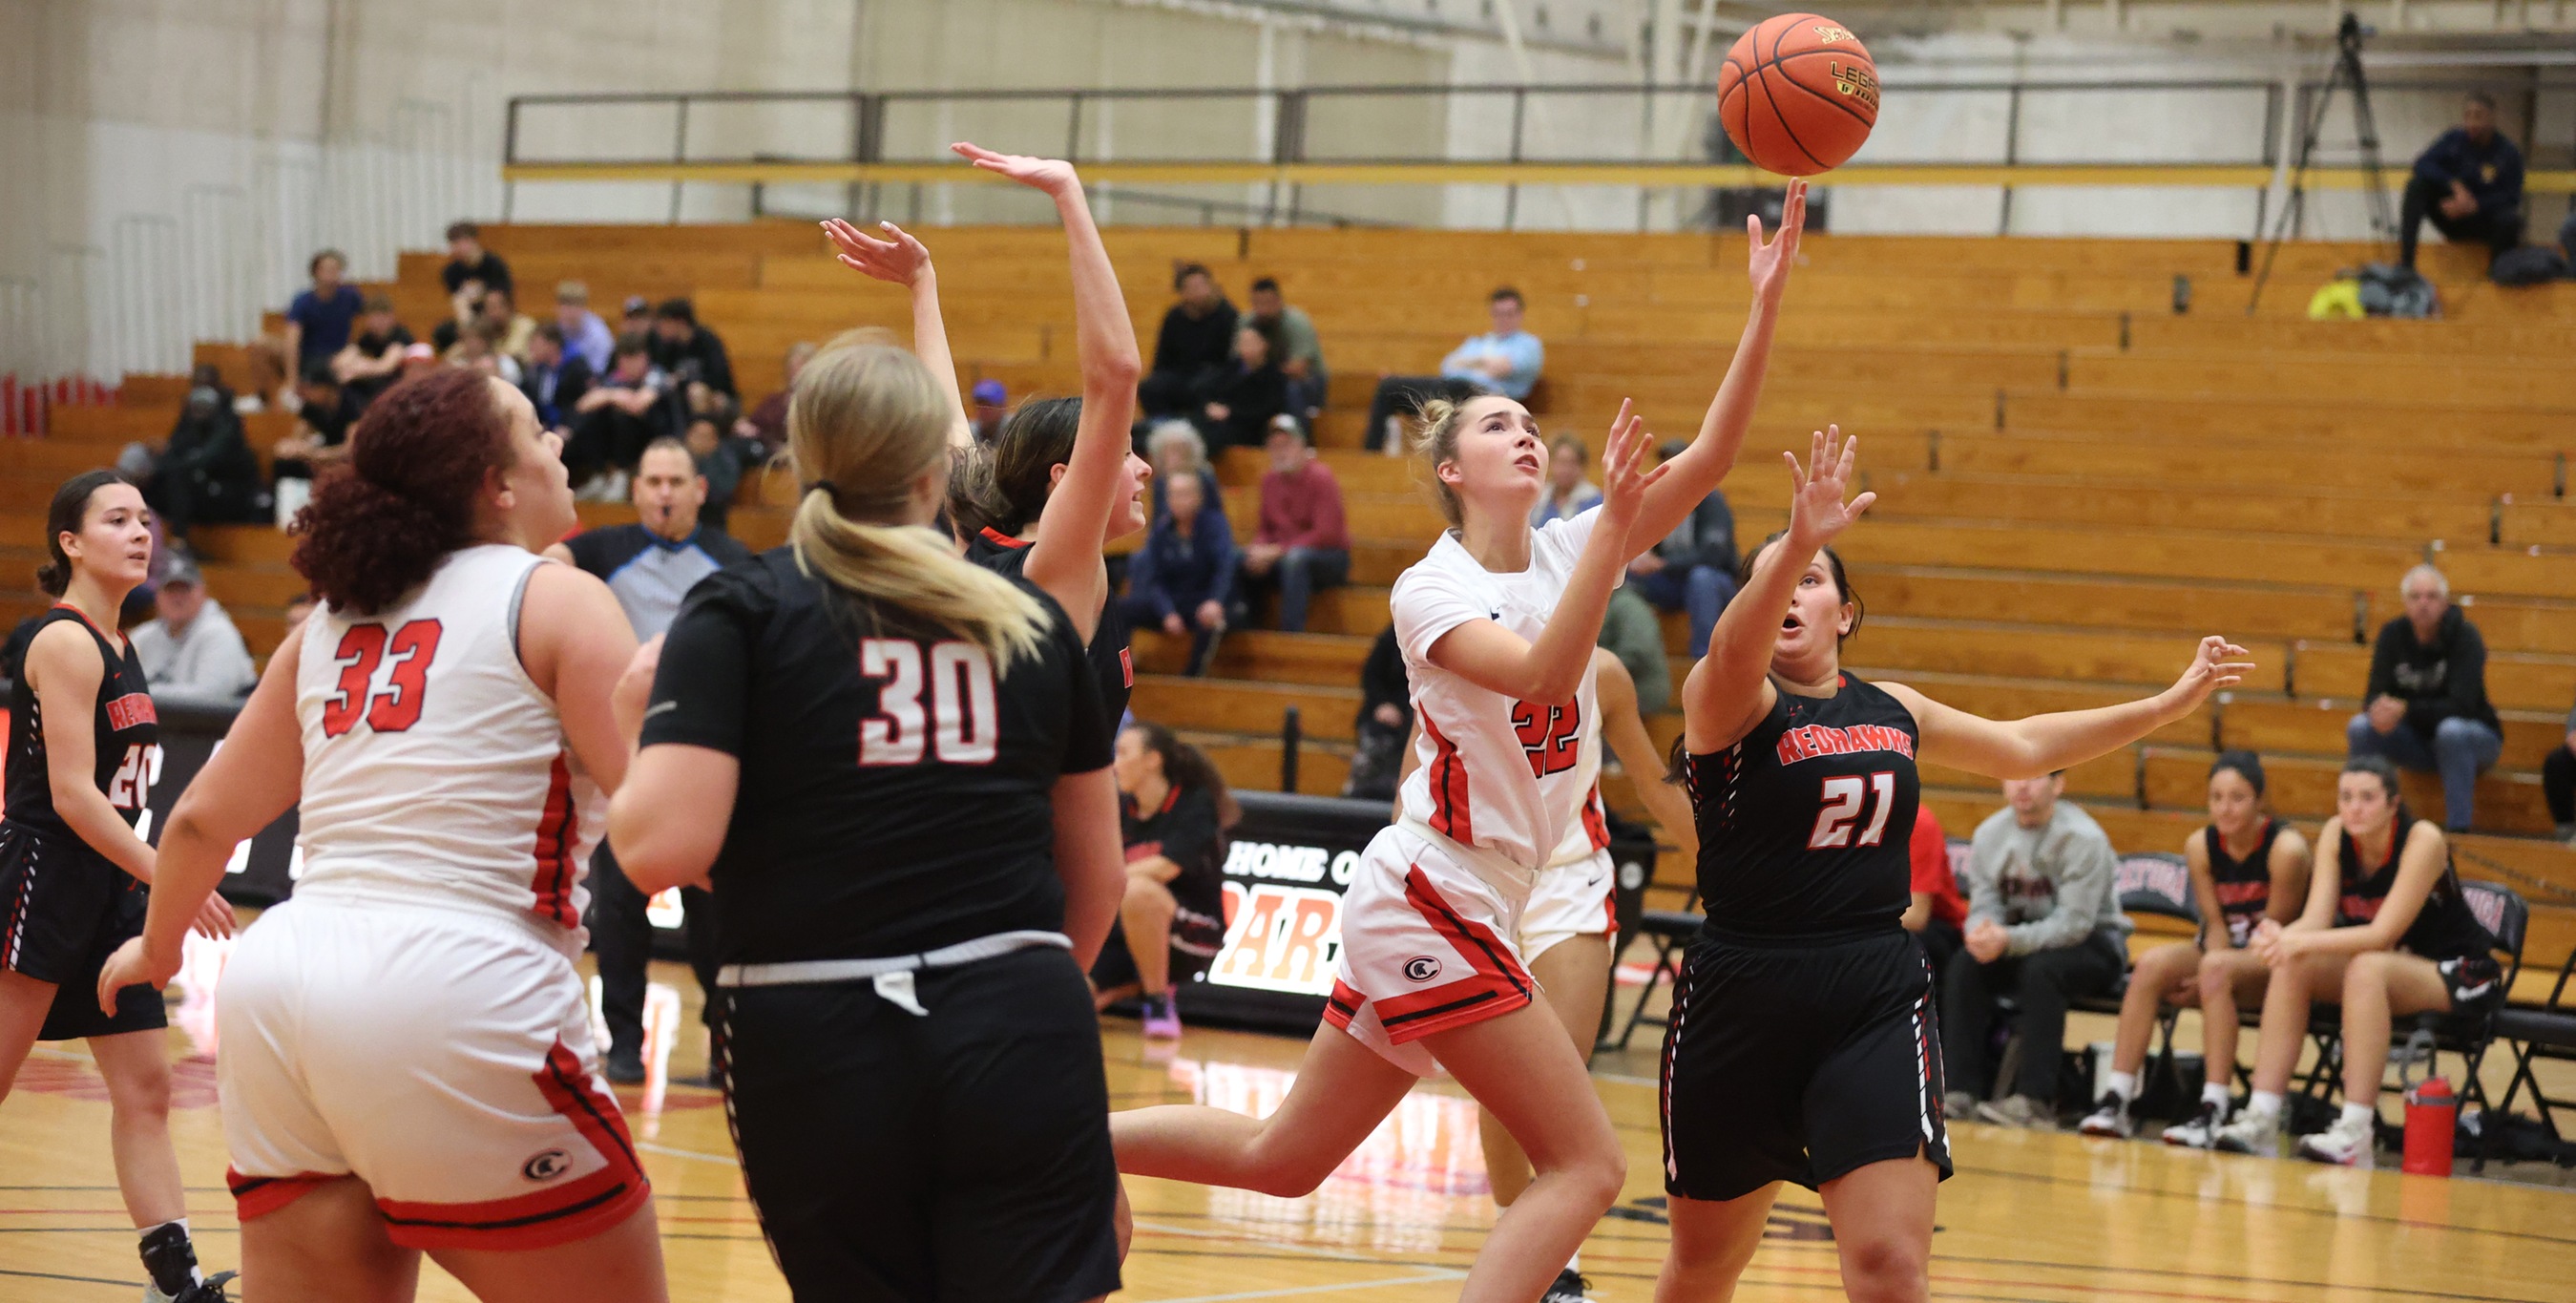 Haley Mosch makes a layup in an earlier contest this season.